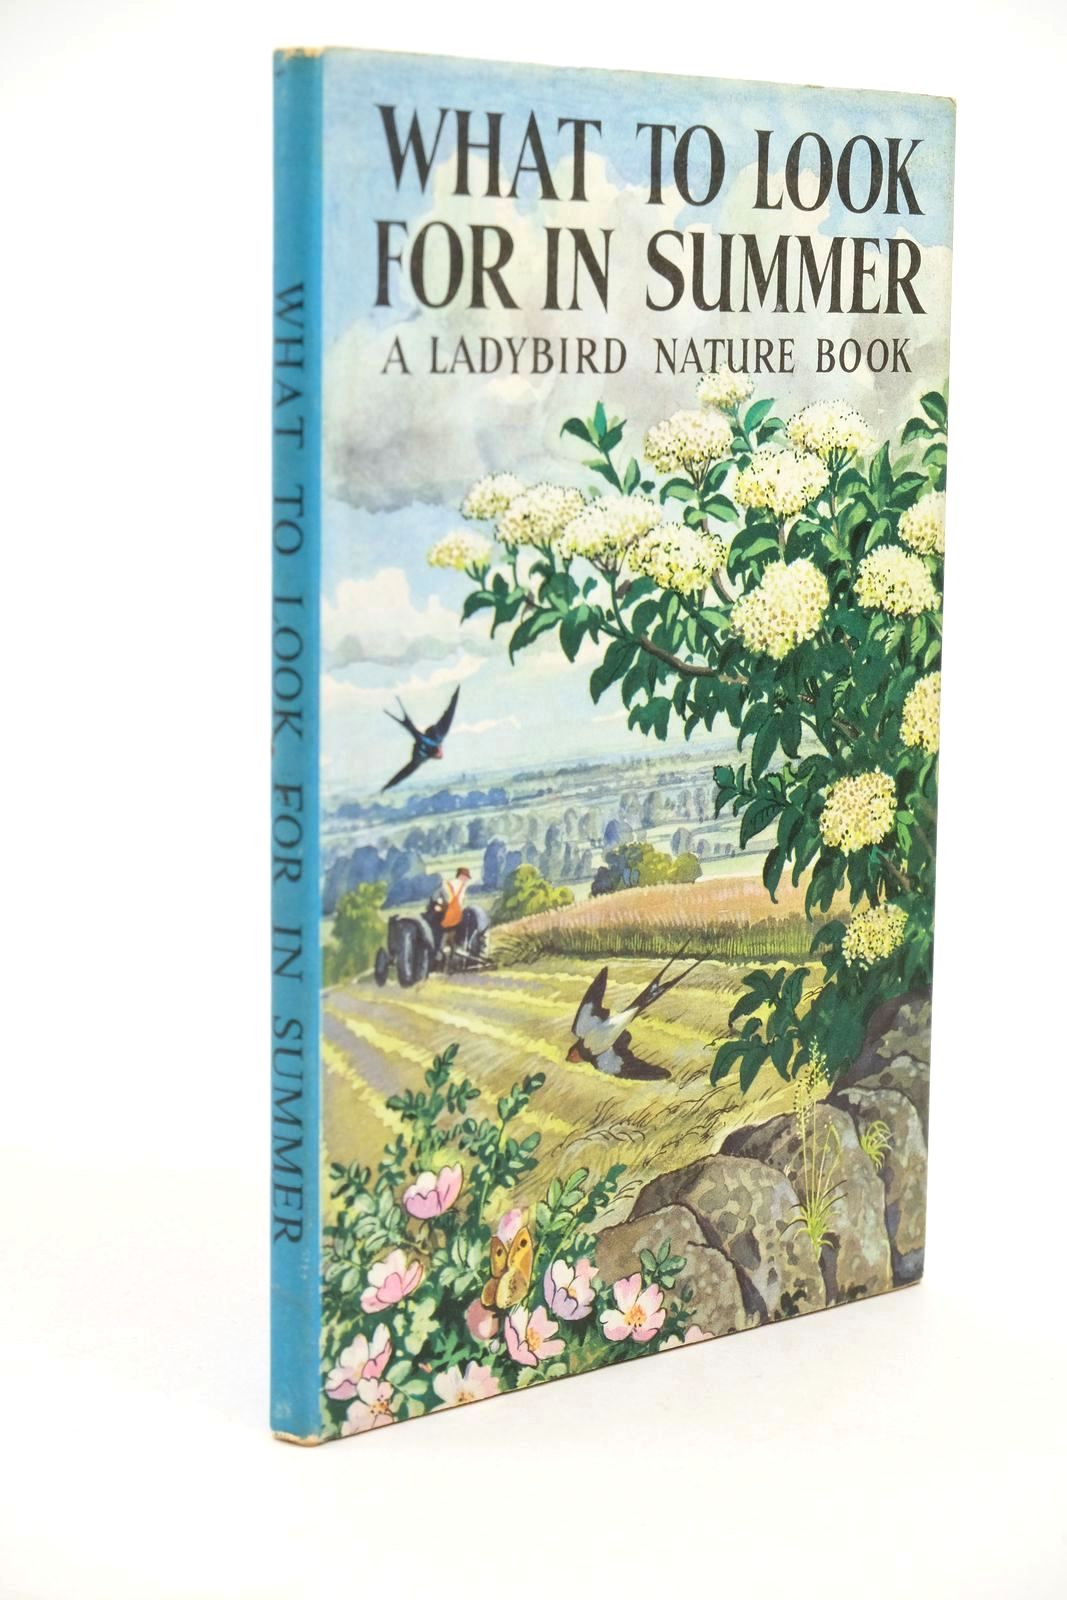 Photo of WHAT TO LOOK FOR IN SUMMER written by Watson, E.L. Grant illustrated by Tunnicliffe, C.F. published by Wills & Hepworth Ltd. (STOCK CODE: 1323145)  for sale by Stella & Rose's Books